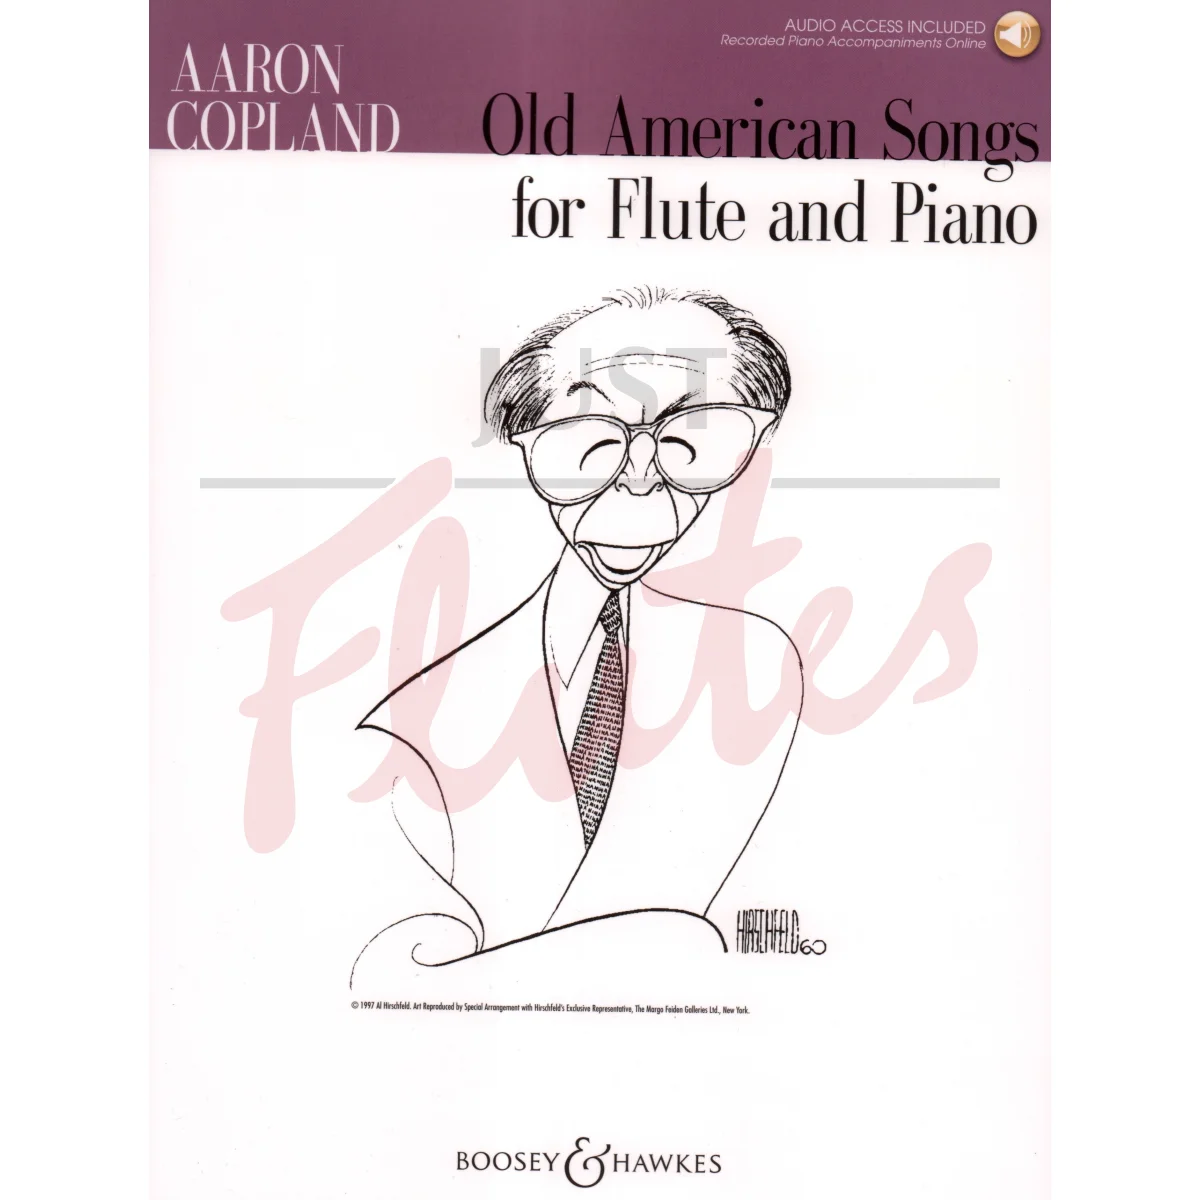 Old American Songs for Flute and Piano